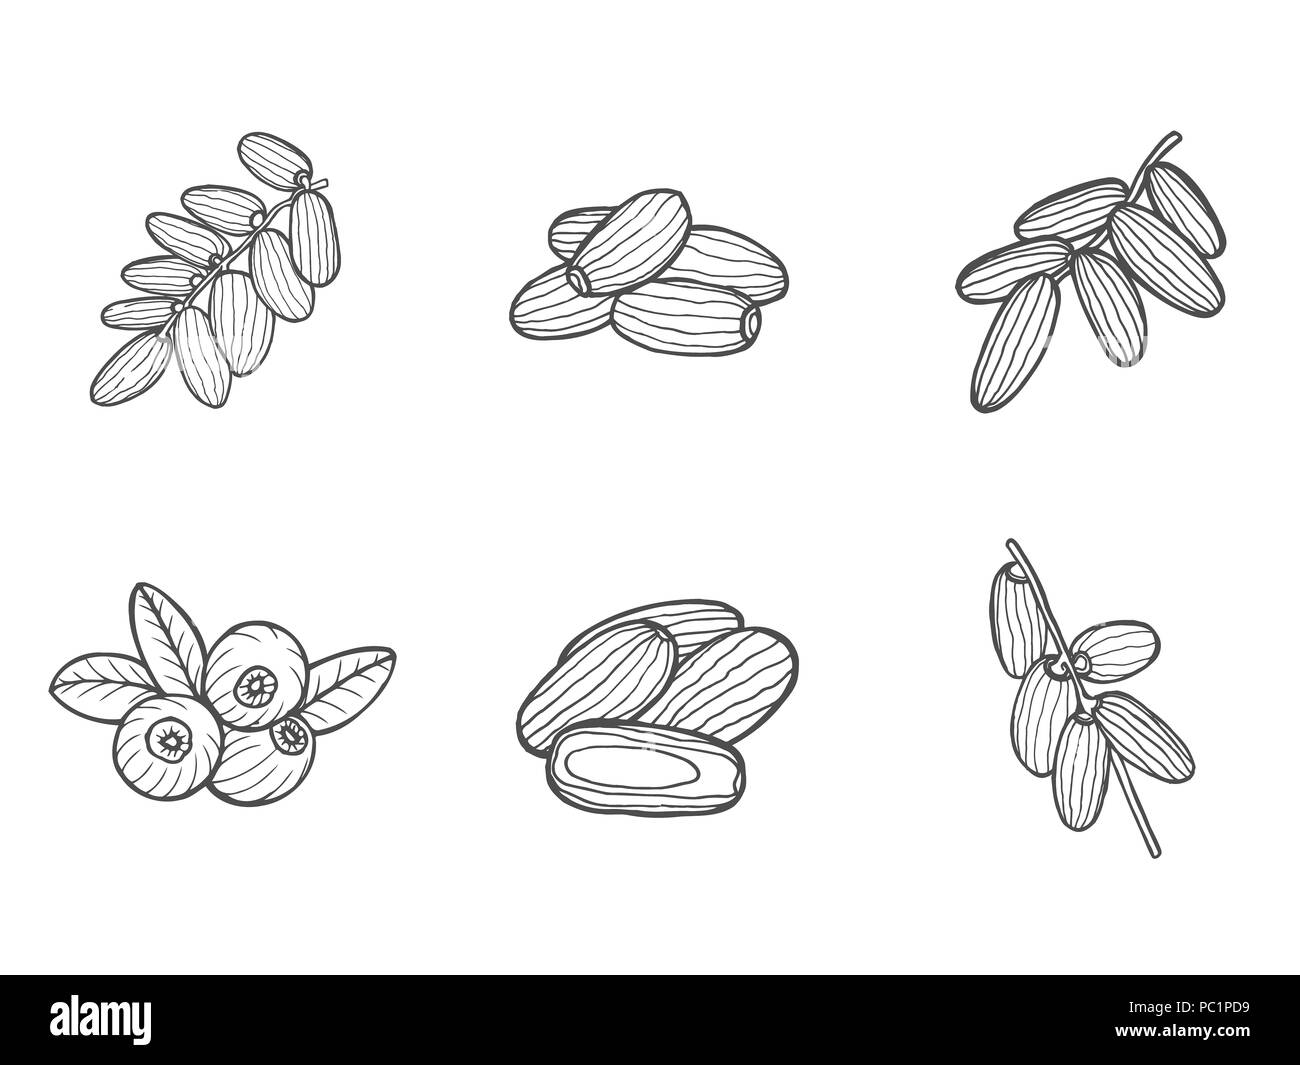 Background with date fruit branch, date fruits and leaves.  hand drawn illustration. Stock Photo